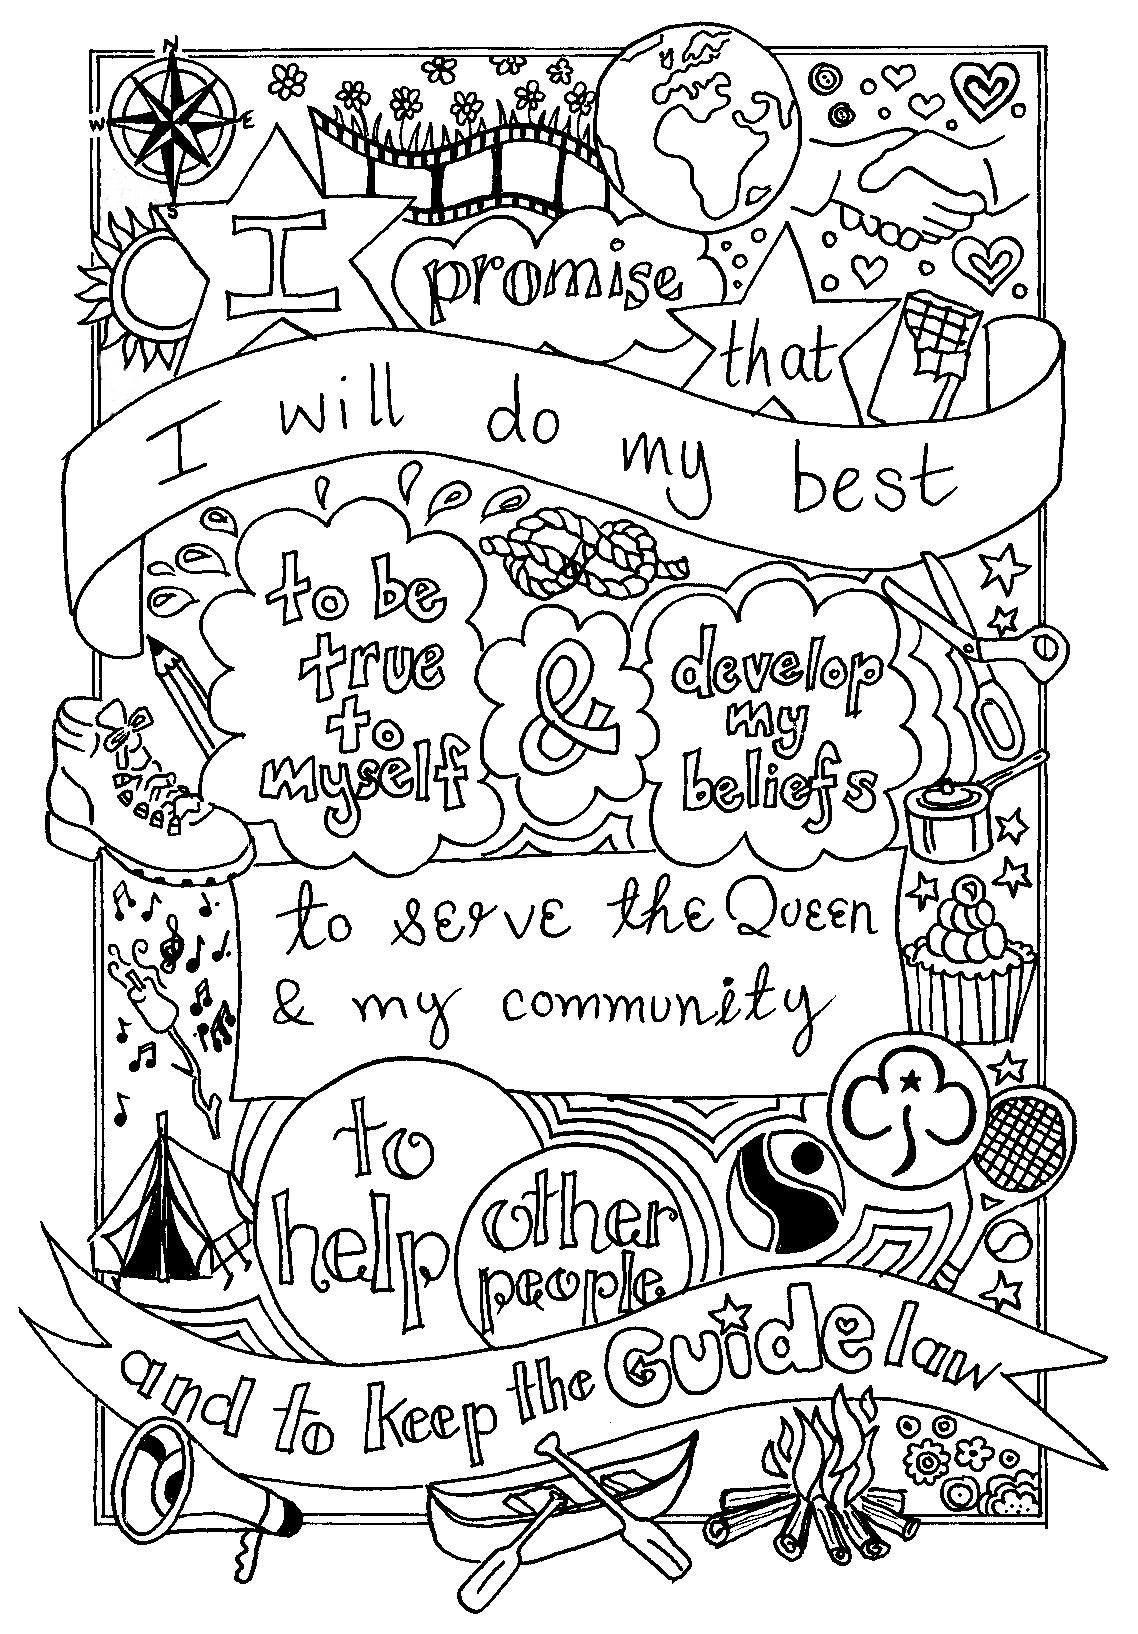 Girls Scout Promise Coloring Pages
 Girl Scout Promise Sheet Coloring Pages